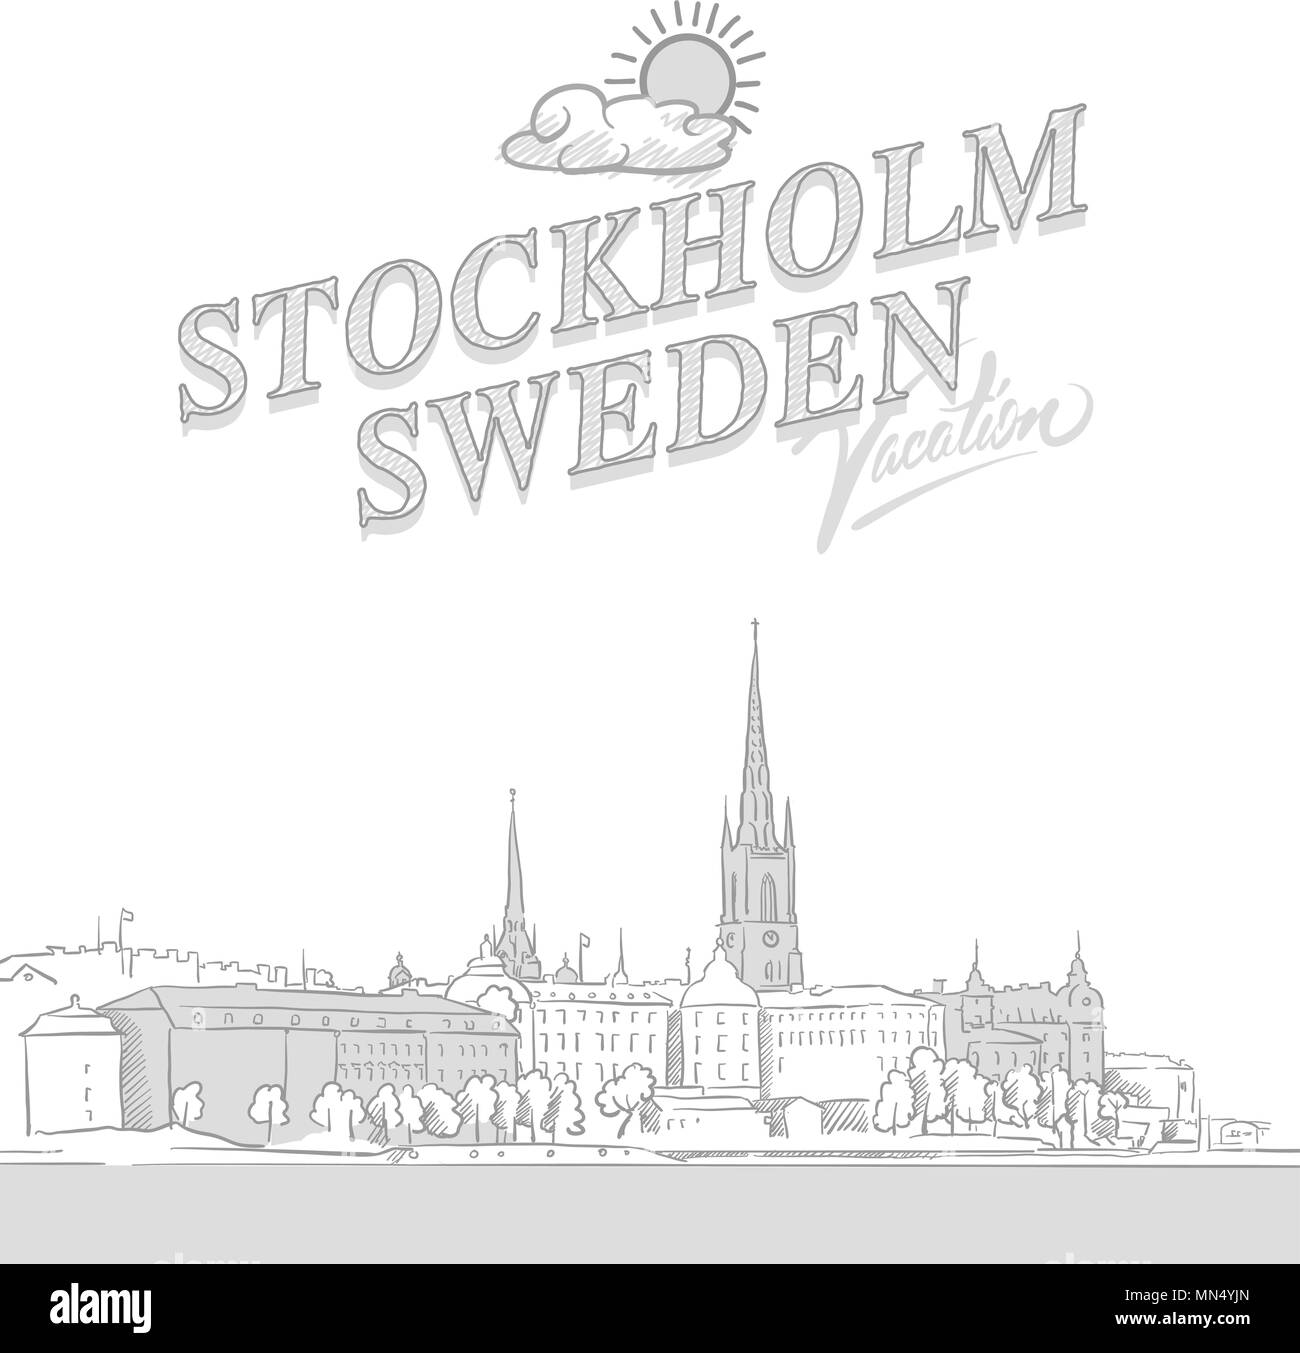 Stockholm travel marketing cover, set of hand drawn a vector sketches Stock Vector